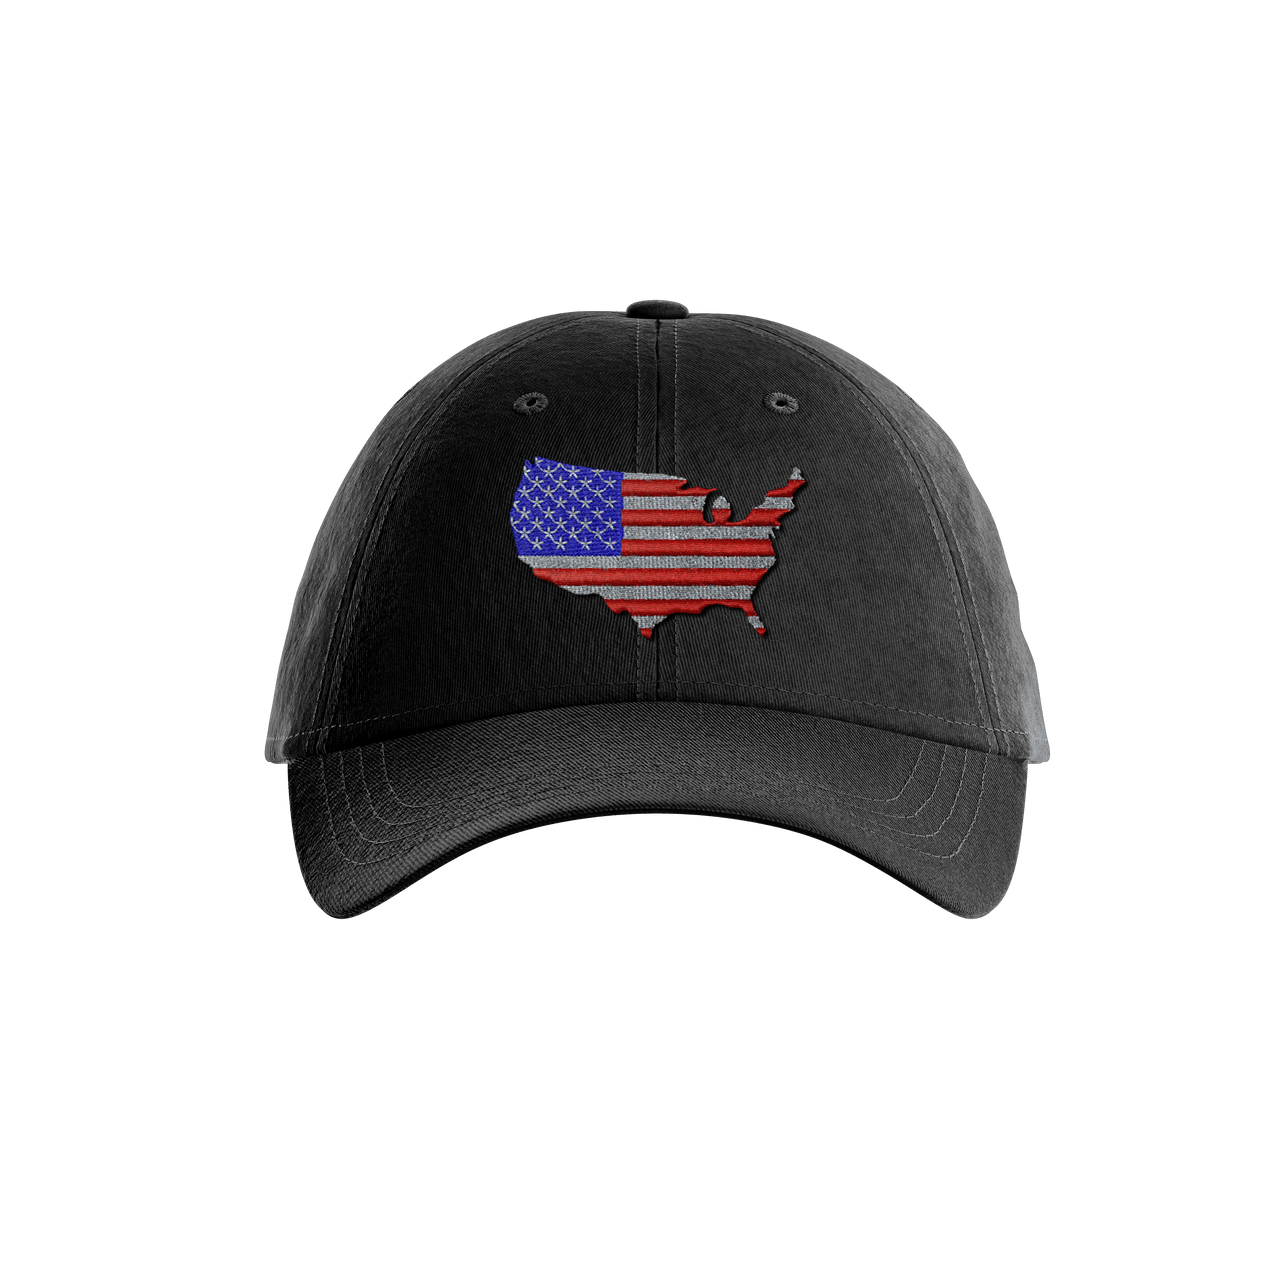 USA Dad hat - Greater Half